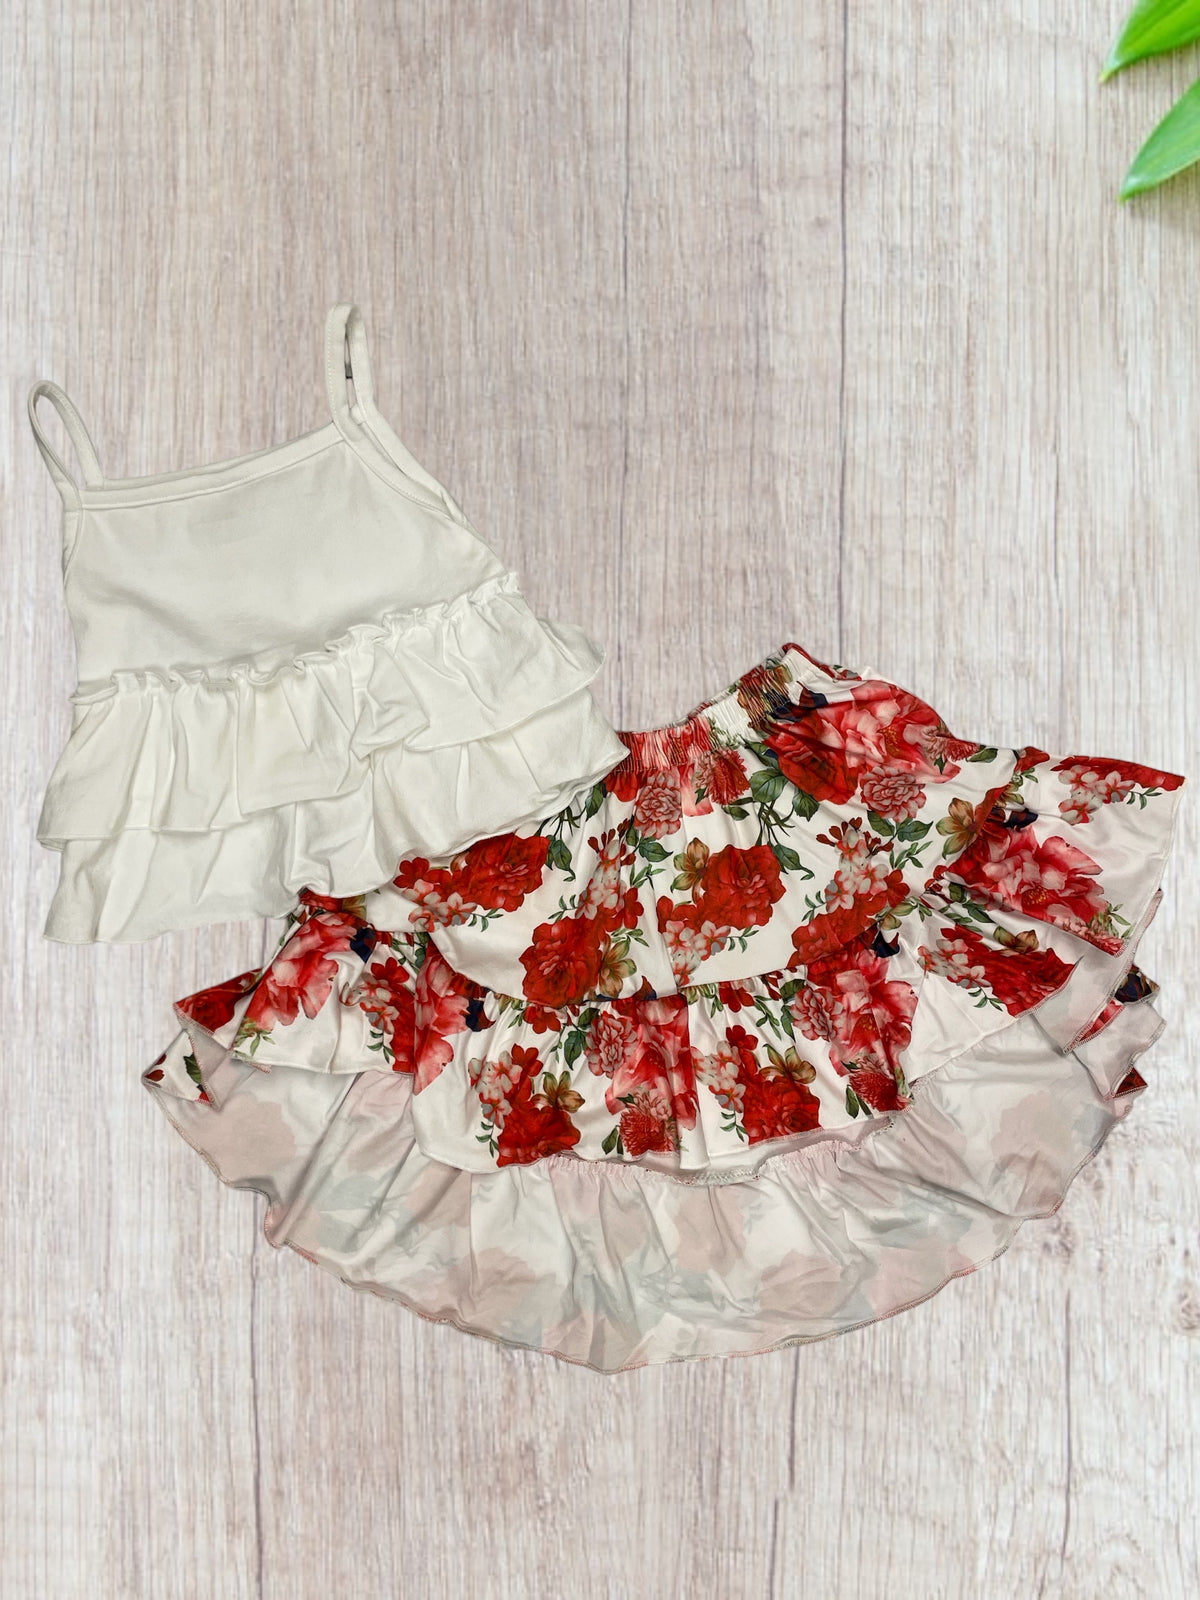 Girls Ruffle Tank and Floral Skirt